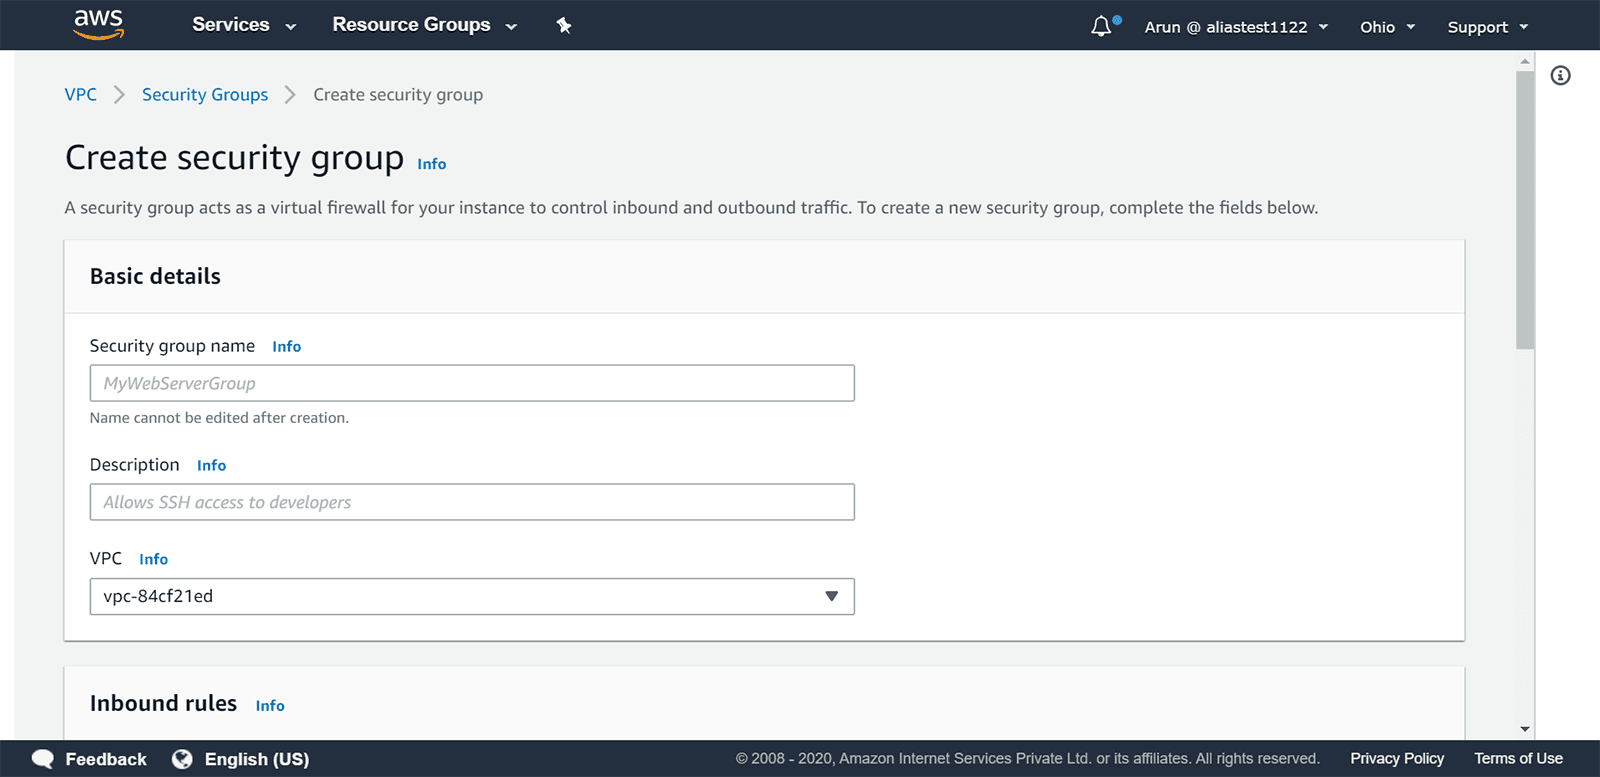 How to create a security group using the AWS Management Console?